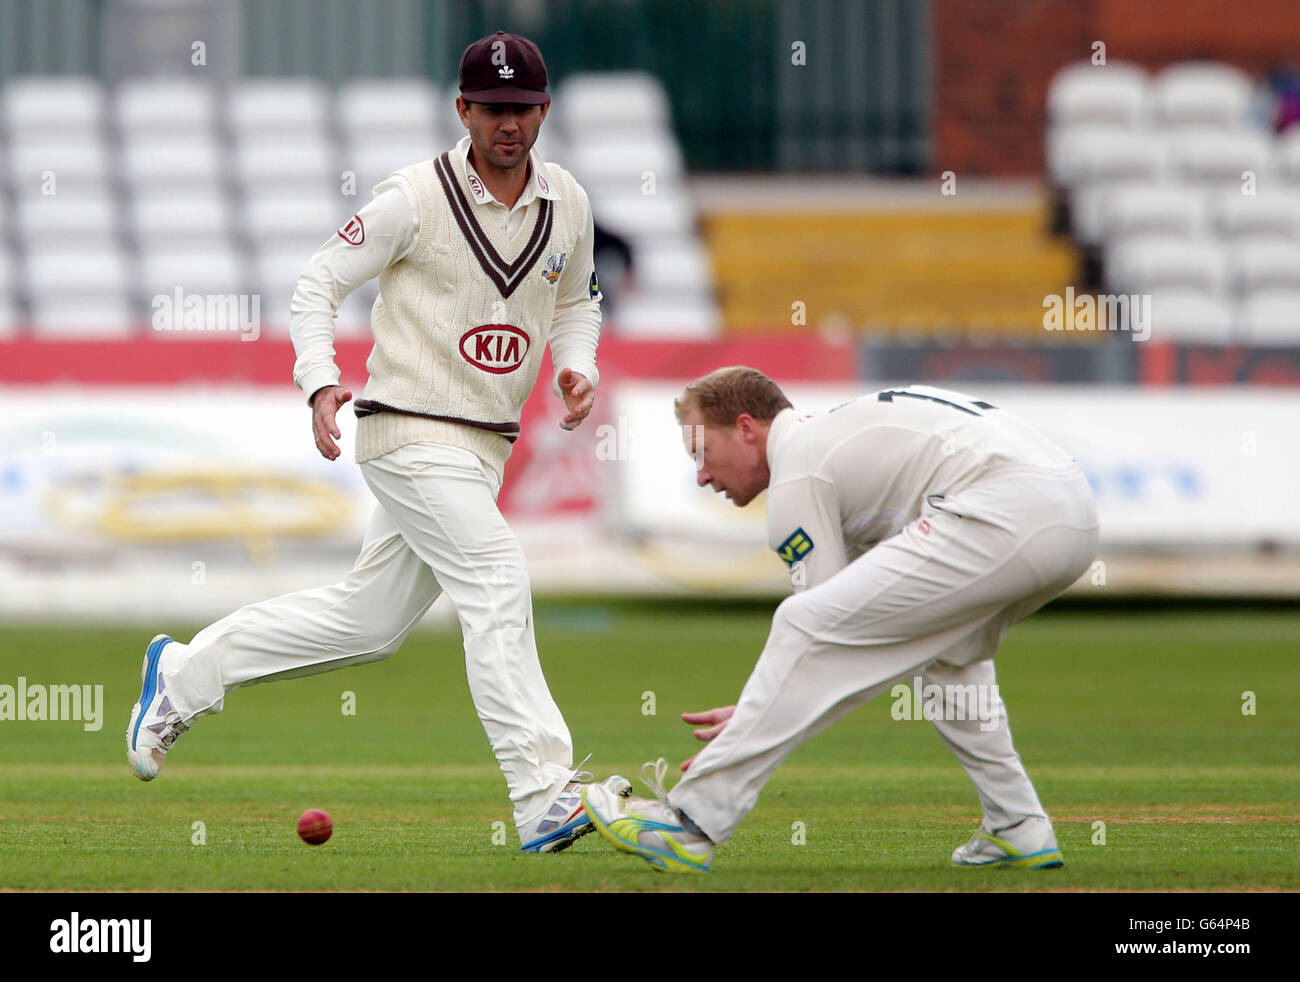 Surrey's Ricky Ponting fields with captain Gareth Batty during the LV= County Championship, Division One match at the County Ground, Derby. Stock Photo